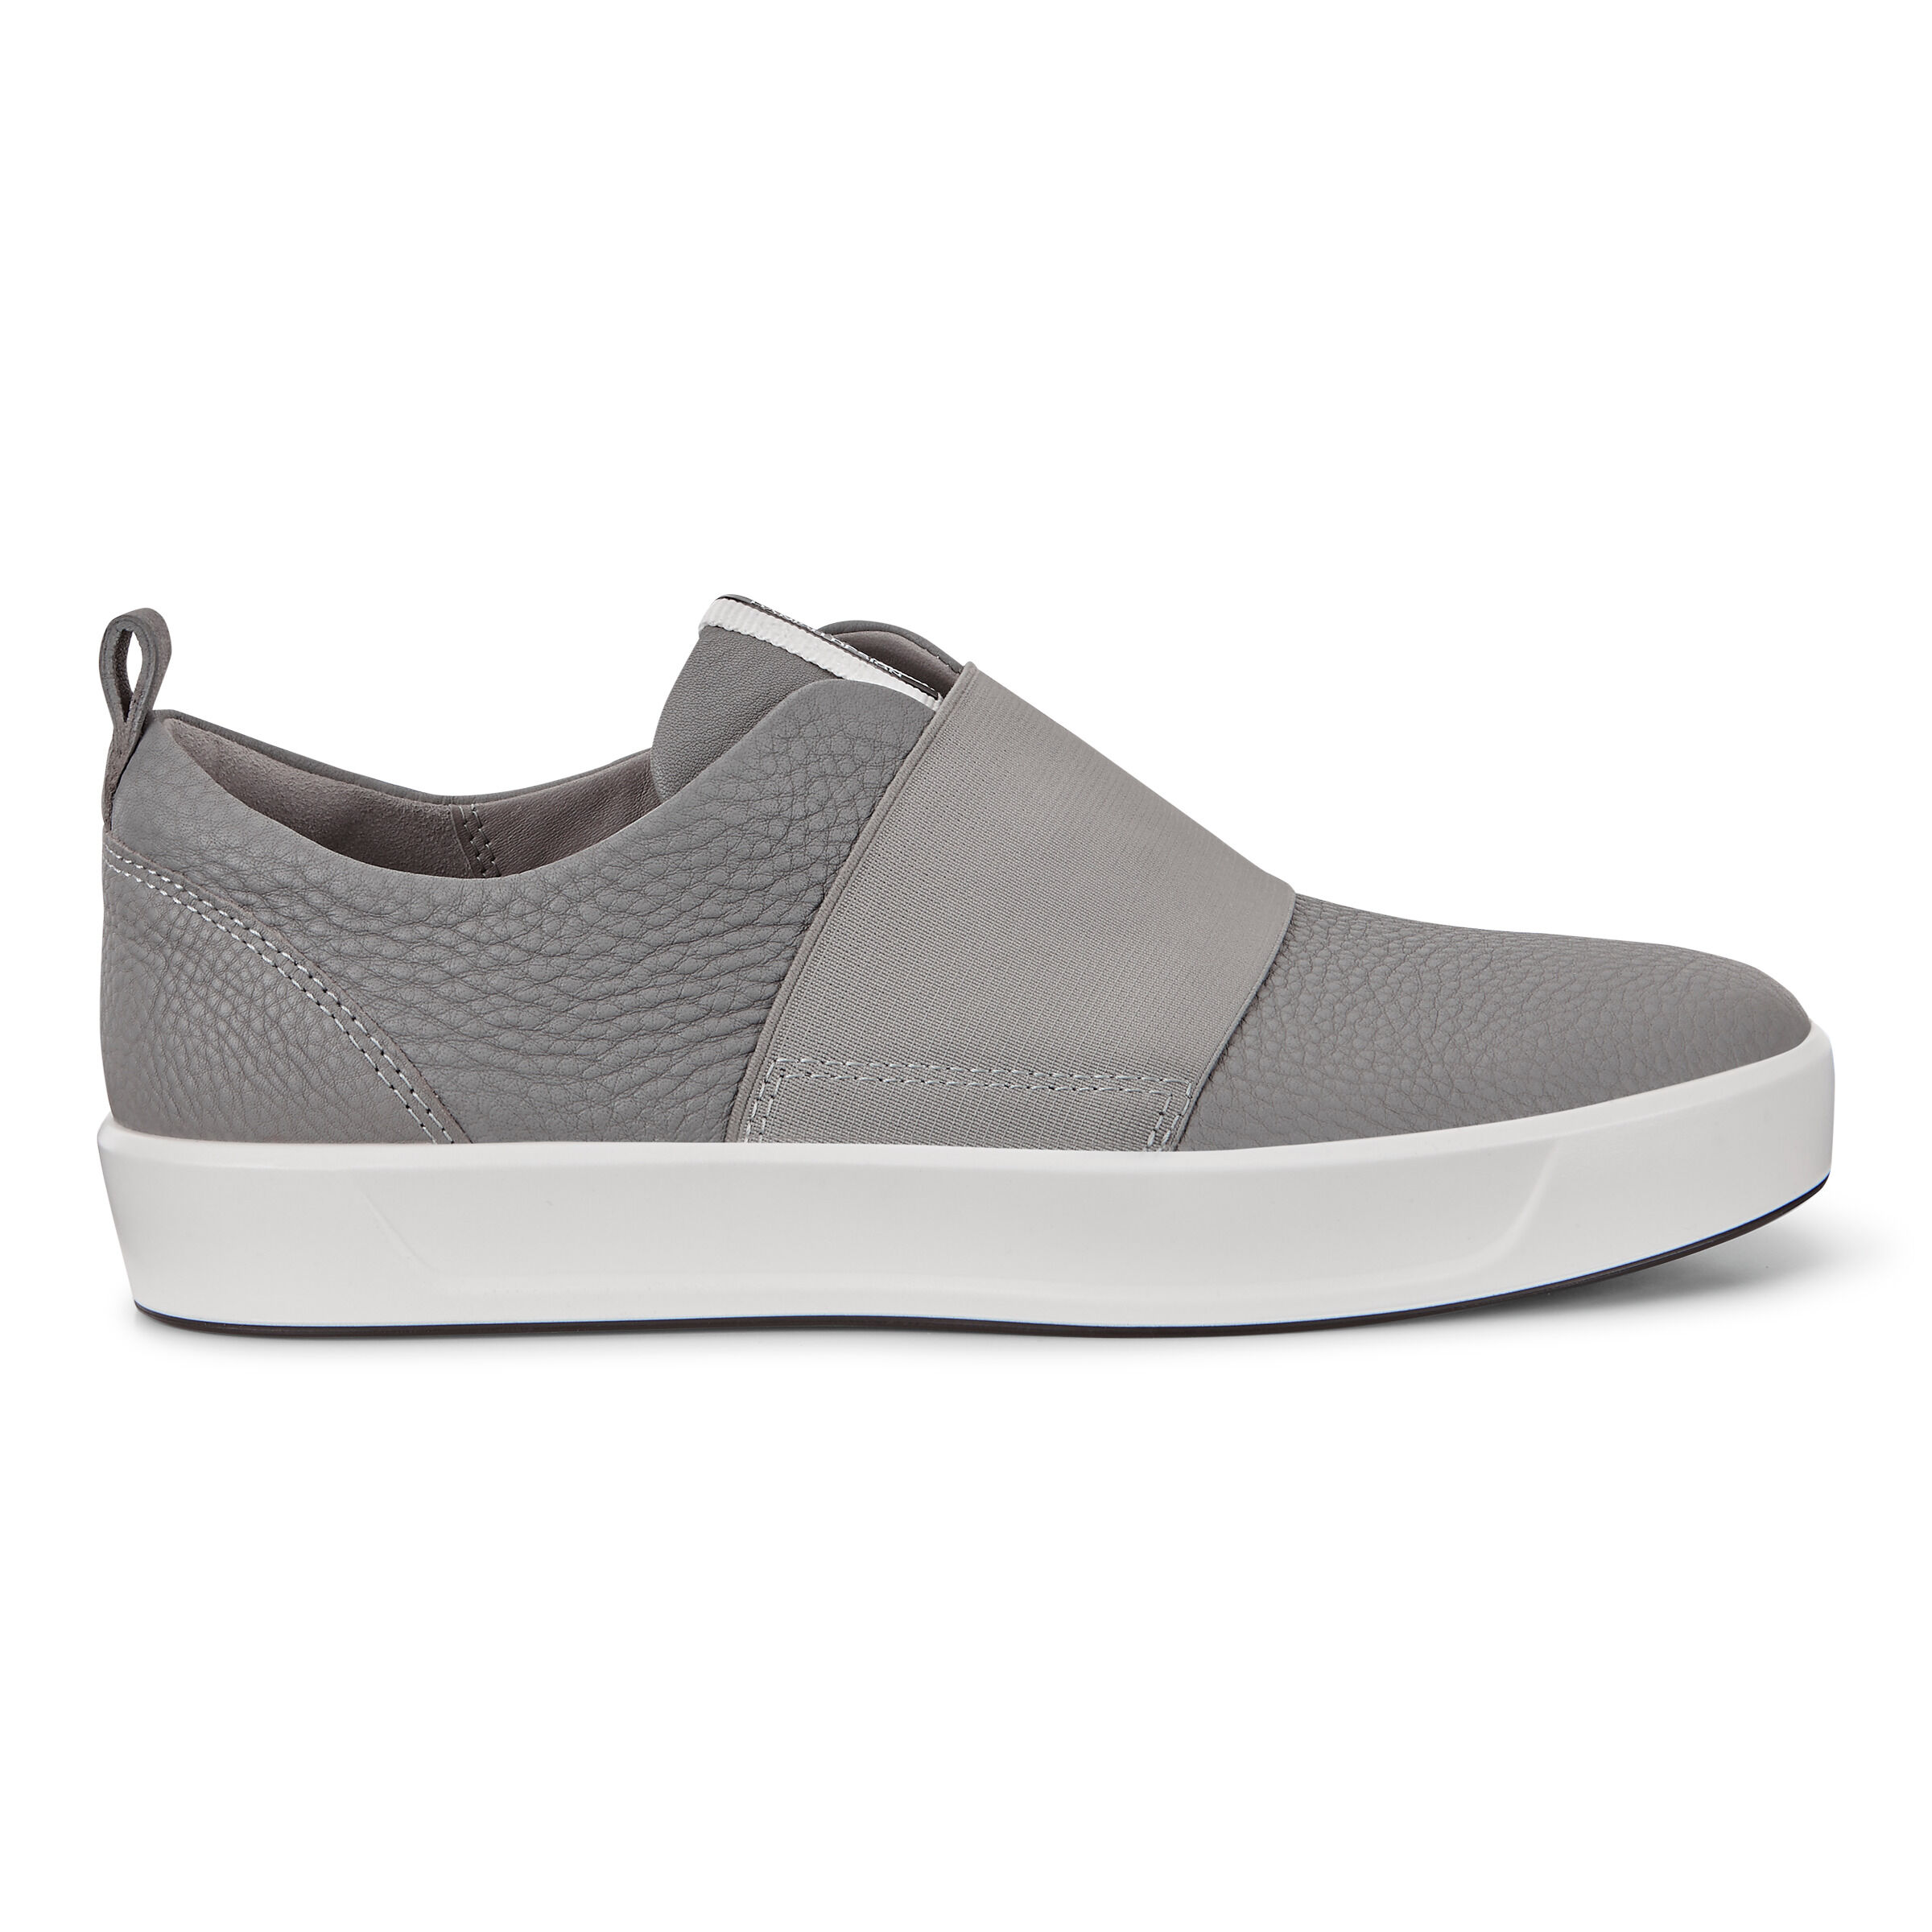 Soft 8 Women's Strap Sneakers | ECCO® Shoes